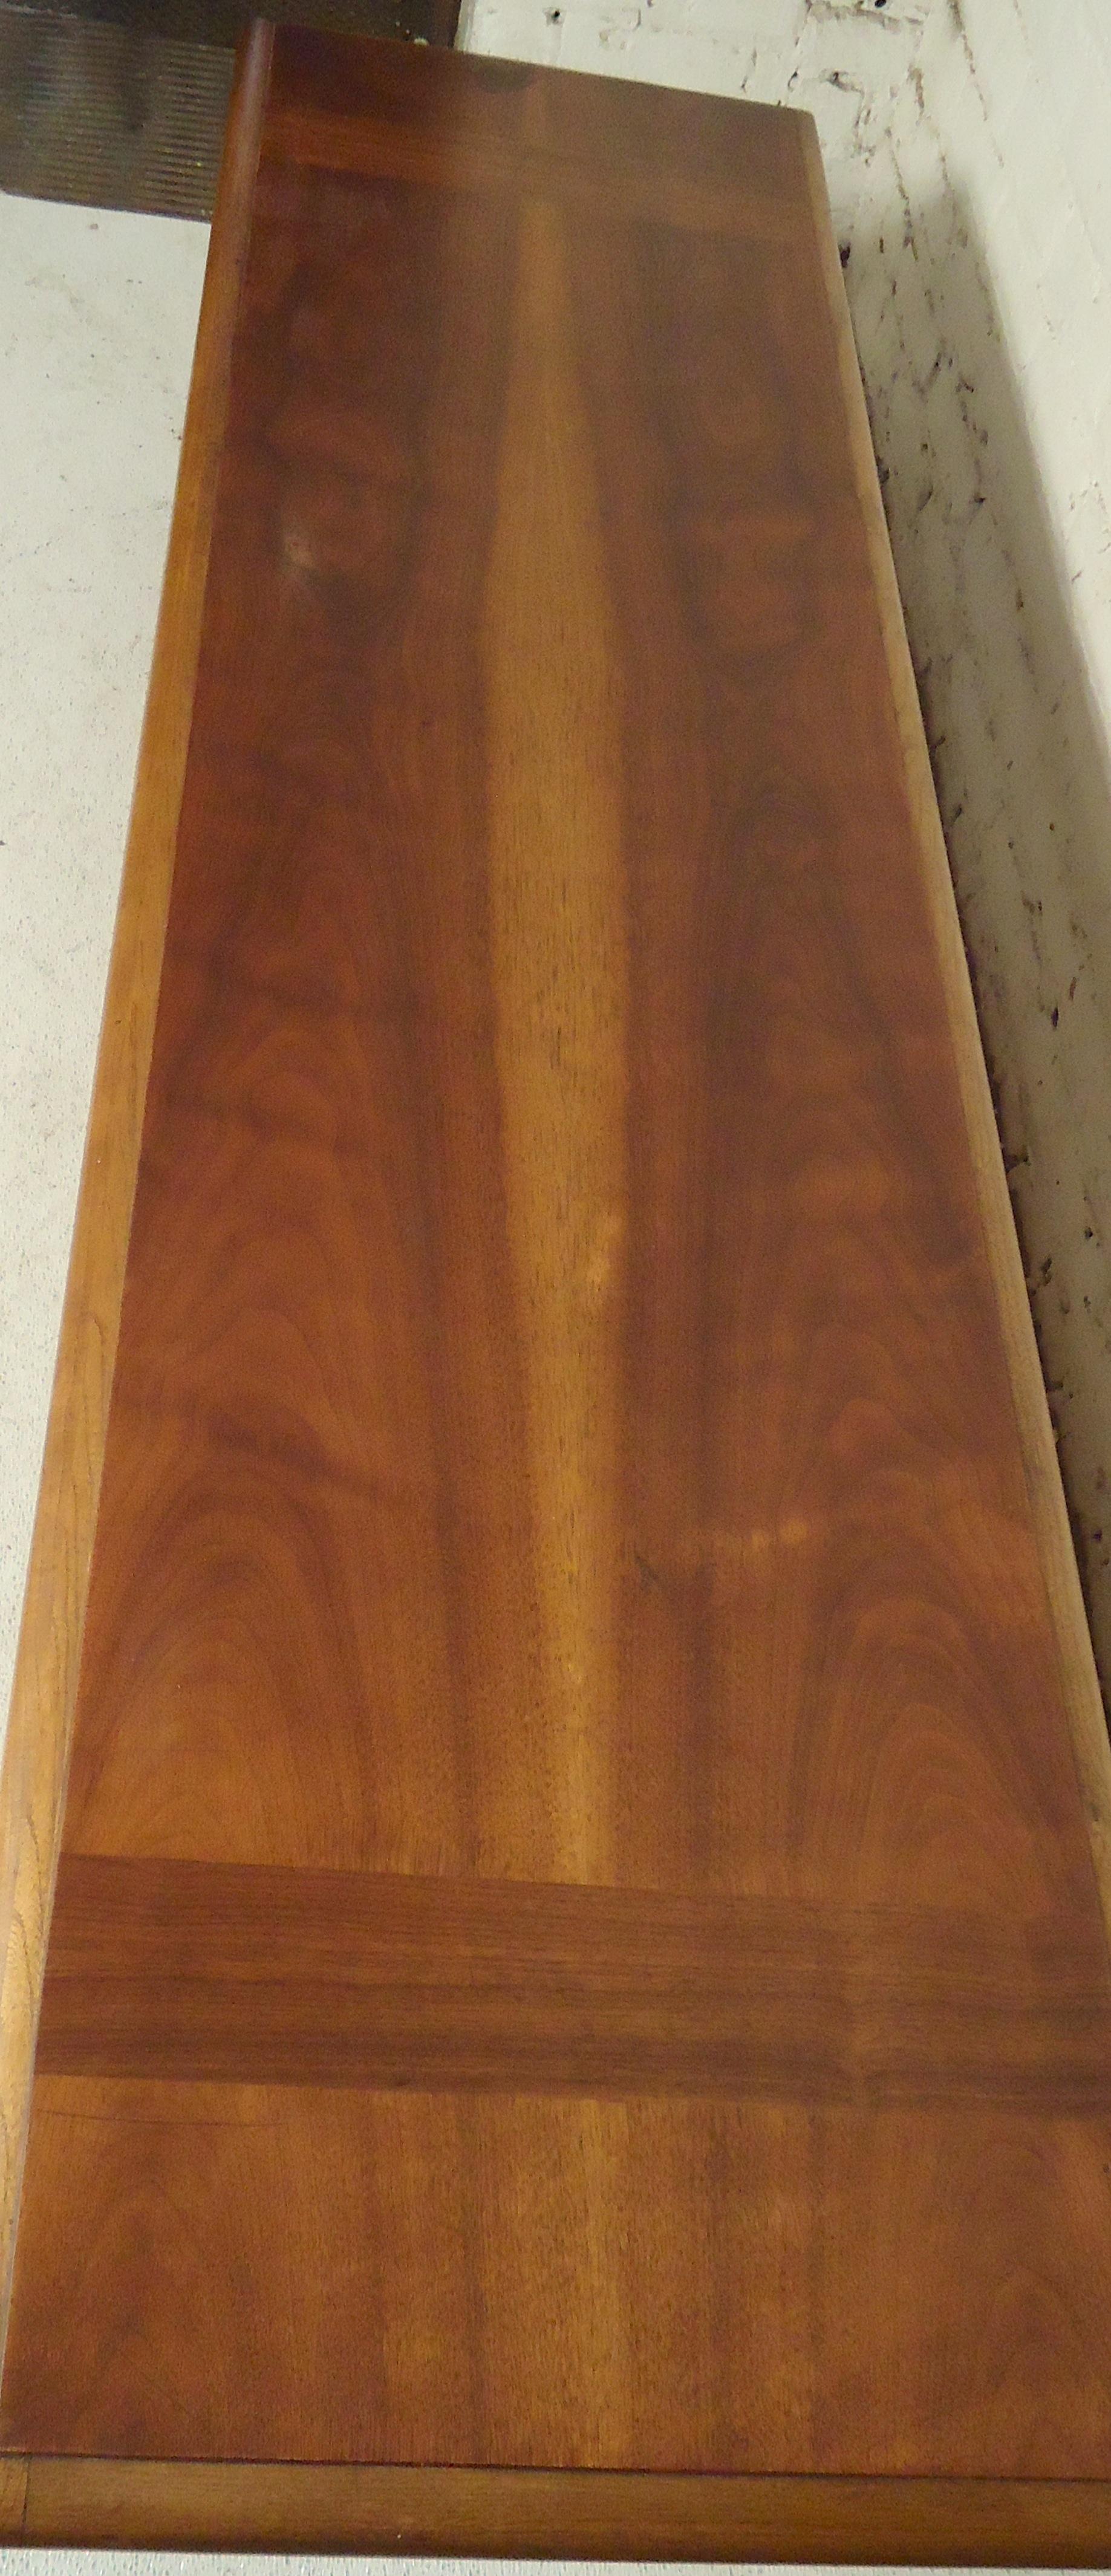 Long walnut coffee table by Lane Furniture. Nice walnut grain with bottom shelf for storage.

(Please confirm item location - NY or NJ - with dealer).
    